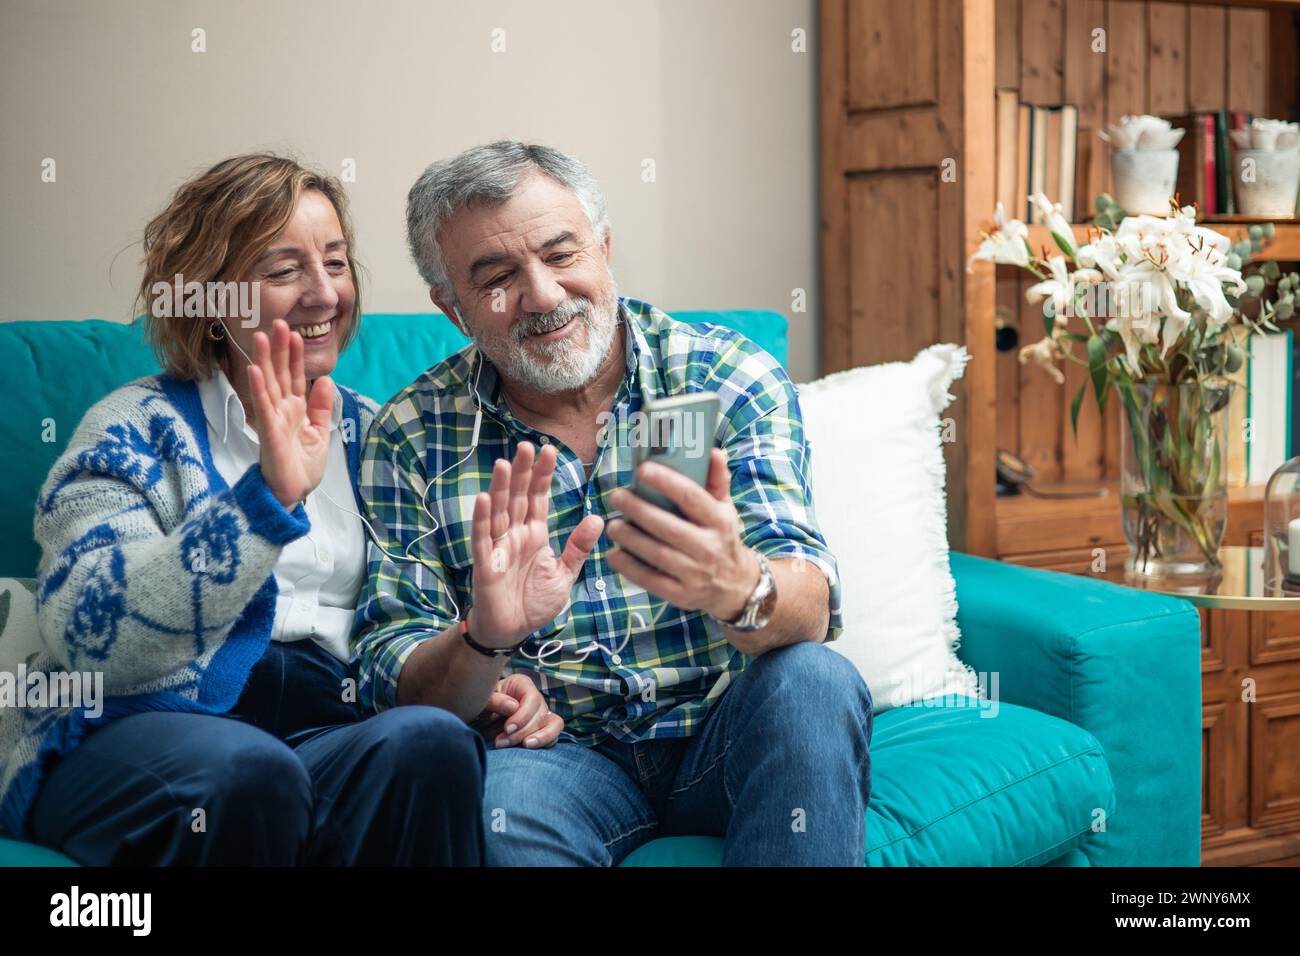 In this modern era, a retired couple sits comfortably on their sofa, warmly greeting their smartphone screen as they engage in a heartwarming video ca Stock Photo